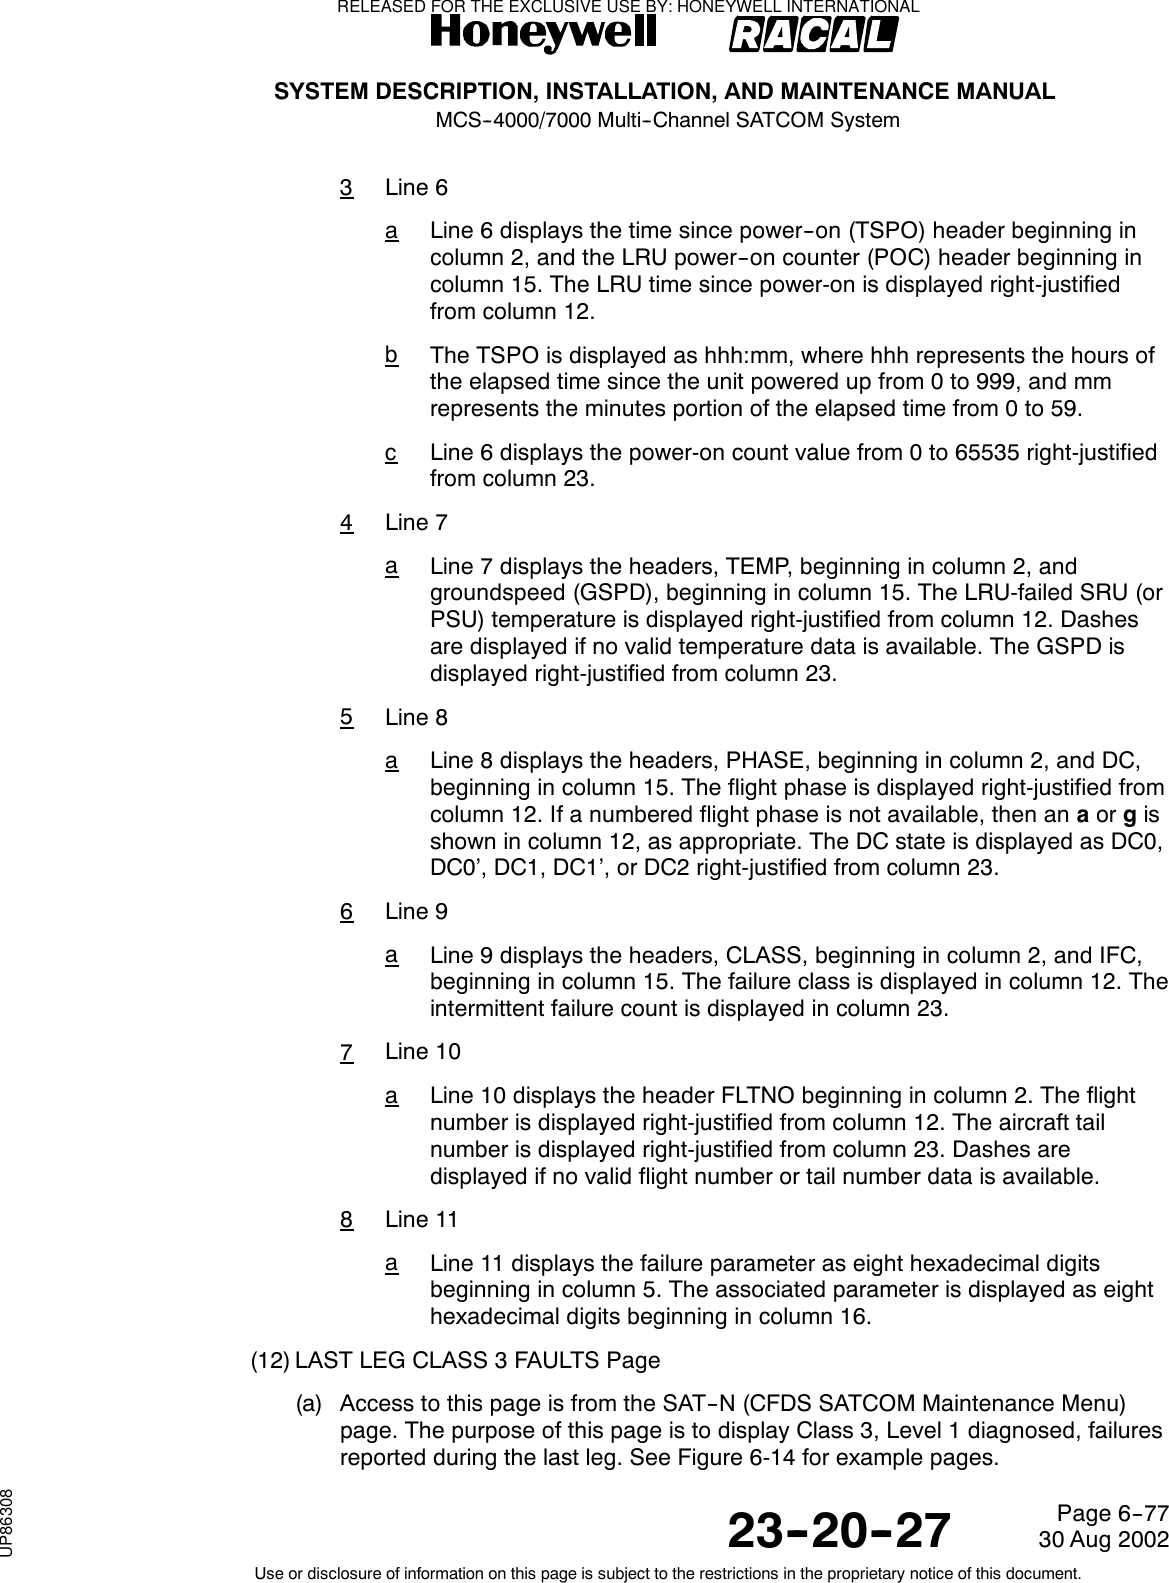 SYSTEM DESCRIPTION, INSTALLATION, AND MAINTENANCE MANUALMCS--4000/7000 Multi--Channel SATCOM System23--20--2730 Aug 2002Use or disclosure of information on this page is subject to the restrictions in the proprietary notice of this document.Page 6--773Line 6aLine 6 displays the time since power--on (TSPO) header beginning incolumn 2, and the LRU power--on counter (POC) header beginning incolumn 15. The LRU time since power-on is displayed right-justifiedfrom column 12.bThe TSPO is displayed as hhh:mm, where hhh represents the hours ofthe elapsed time since the unit powered up from 0 to 999, and mmrepresents the minutes portion of the elapsed time from 0 to 59.cLine 6 displays the power-on count value from 0 to 65535 right-justifiedfrom column 23.4Line 7aLine 7 displays the headers, TEMP, beginning in column 2, andgroundspeed (GSPD), beginning in column 15. The LRU-failed SRU (orPSU) temperature is displayed right-justified from column 12. Dashesare displayed if no valid temperature data is available. The GSPD isdisplayed right-justified from column 23.5Line 8aLine 8 displays the headers, PHASE, beginning in column 2, and DC,beginning in column 15. The flight phase is displayed right-justified fromcolumn 12. If a numbered flight phase is not available, then an aor gisshown in column 12, as appropriate. The DC state is displayed as DC0,DC0’, DC1, DC1’, or DC2 right-justified from column 23.6Line 9aLine 9 displays the headers, CLASS, beginning in column 2, and IFC,beginning in column 15. The failure class is displayed in column 12. Theintermittent failure count is displayed in column 23.7Line 10aLine 10 displays the header FLTNO beginning in column 2. The flightnumber is displayed right-justified from column 12. The aircraft tailnumber is displayed right-justified from column 23. Dashes aredisplayed if no valid flight number or tail number data is available.8Line 11aLine 11 displays the failure parameter as eight hexadecimal digitsbeginning in column 5. The associated parameter is displayed as eighthexadecimal digits beginning in column 16.(12) LAST LEG CLASS 3 FAULTS Page(a) Access to this page is from the SAT--N (CFDS SATCOM Maintenance Menu)page. The purpose of this page is to display Class 3, Level 1 diagnosed, failuresreported during the last leg. See Figure 6-14 for example pages.RELEASED FOR THE EXCLUSIVE USE BY: HONEYWELL INTERNATIONALUP86308